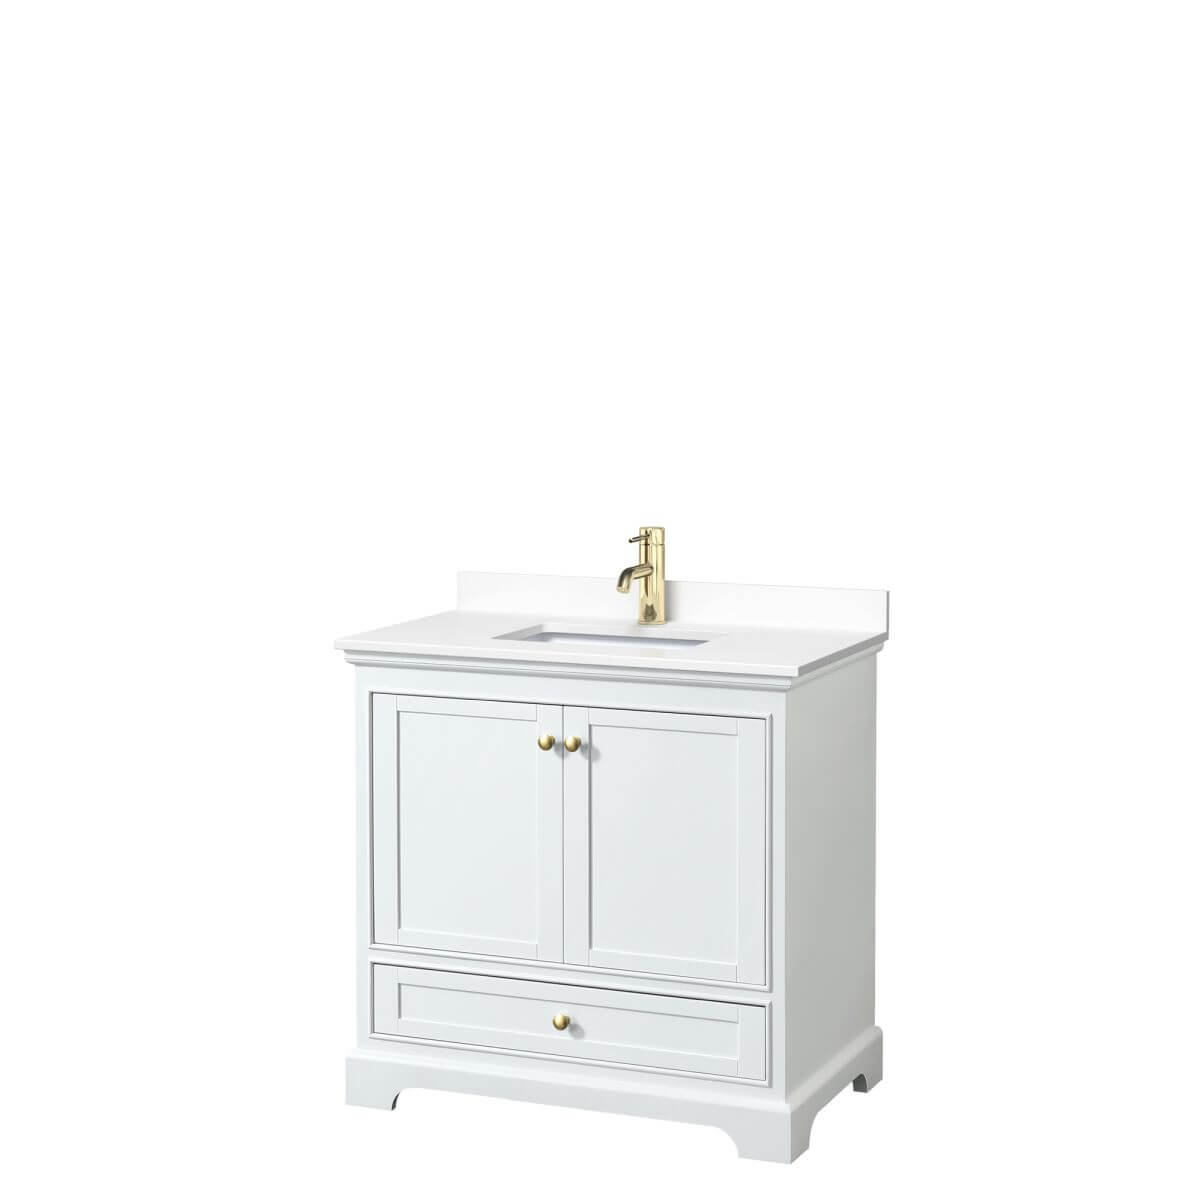 Wyndham Collection Deborah 36 inch Single Bathroom Vanity in White with White Cultured Marble Countertop, Undermount Square Sink, Brushed Gold Trim and No Mirror - WCS202036SWGWCUNSMXX